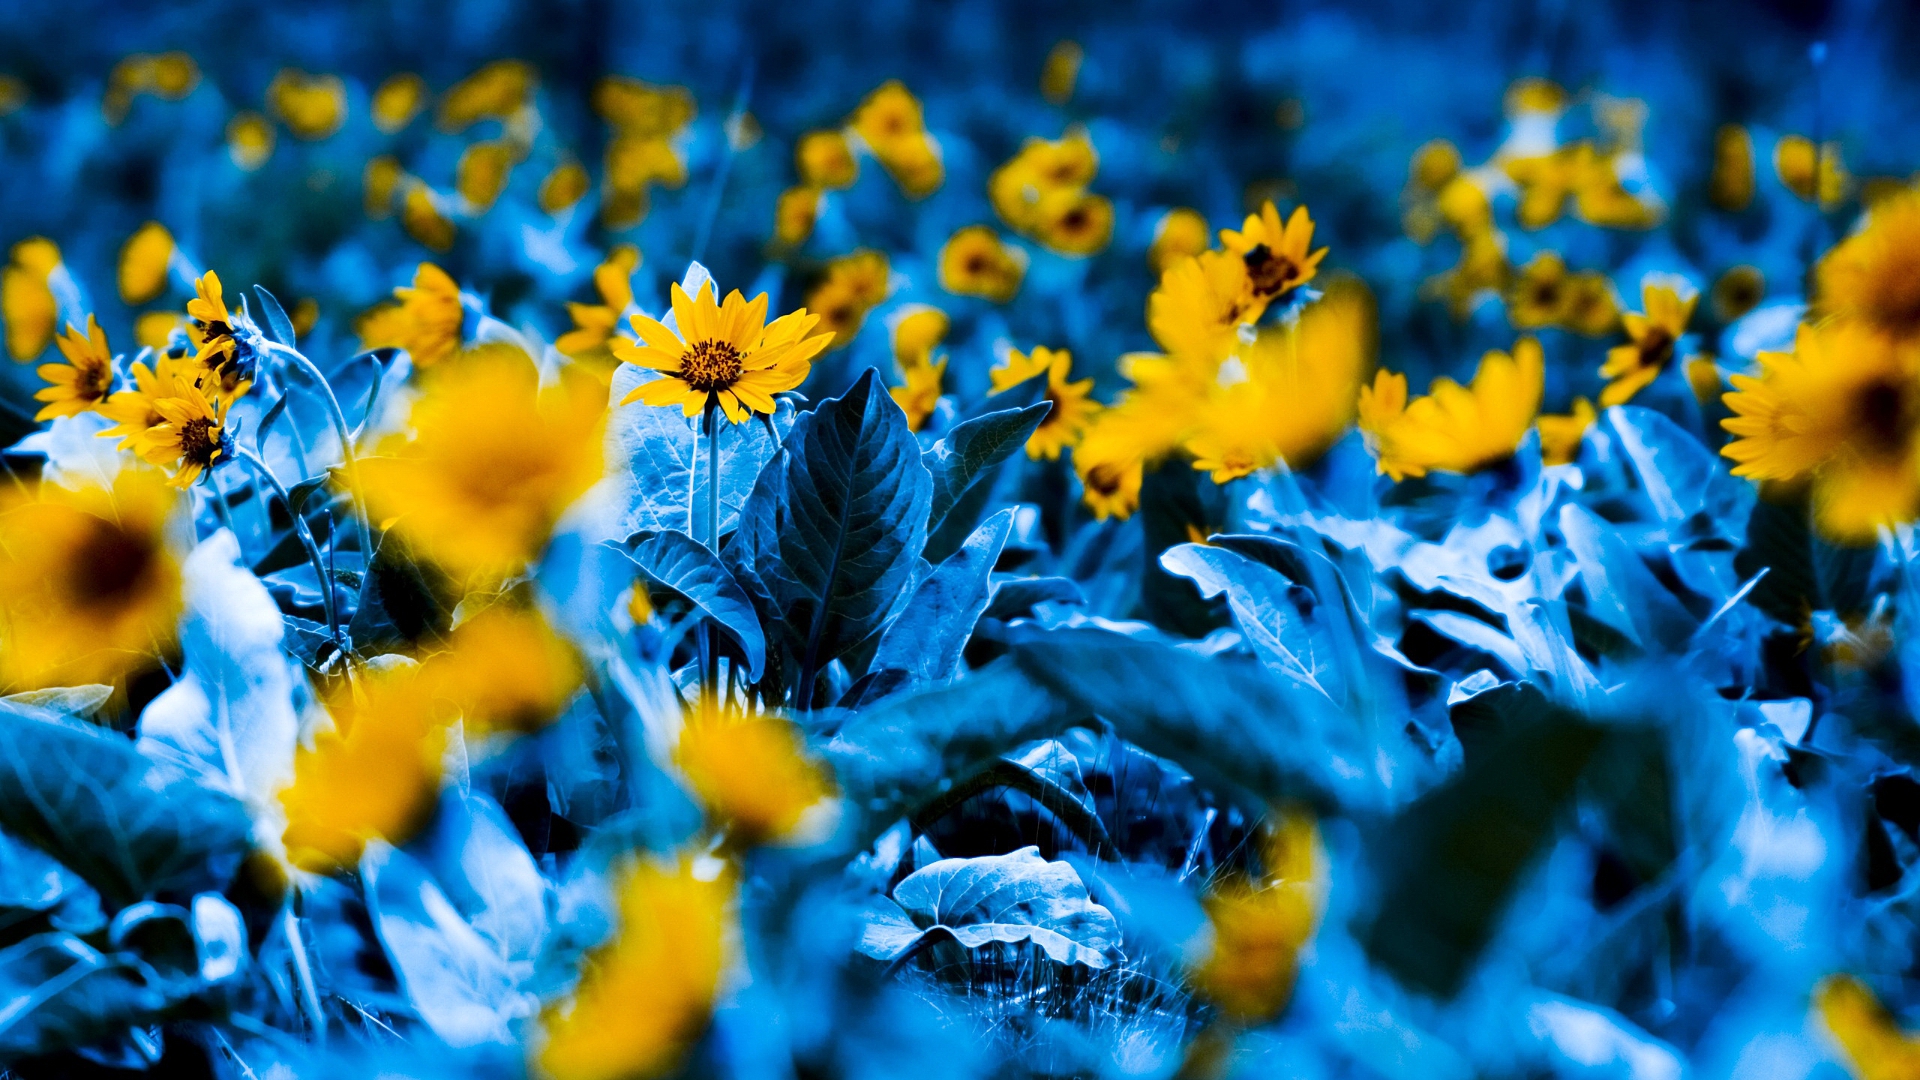 General 1920x1080 colorful photography flowers yellow flowers yellow selective coloring depth of field grass blue digital art blurred blurry background leaves sunflowers